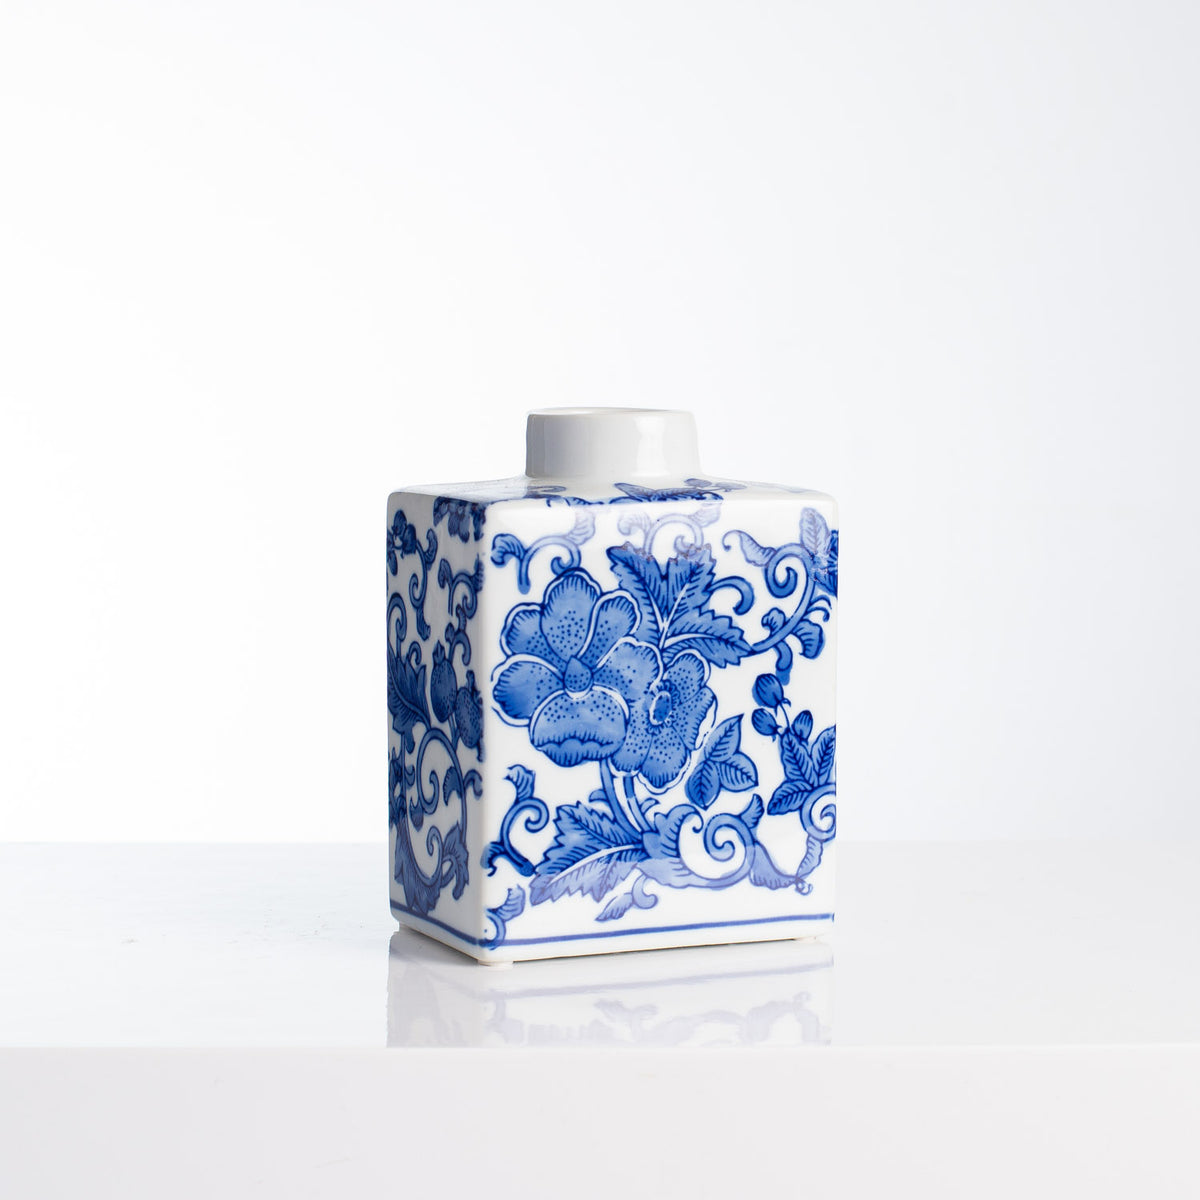 Blue & White Floral Chinoiserie Porcelain Decor Vase - Available in 2 ...